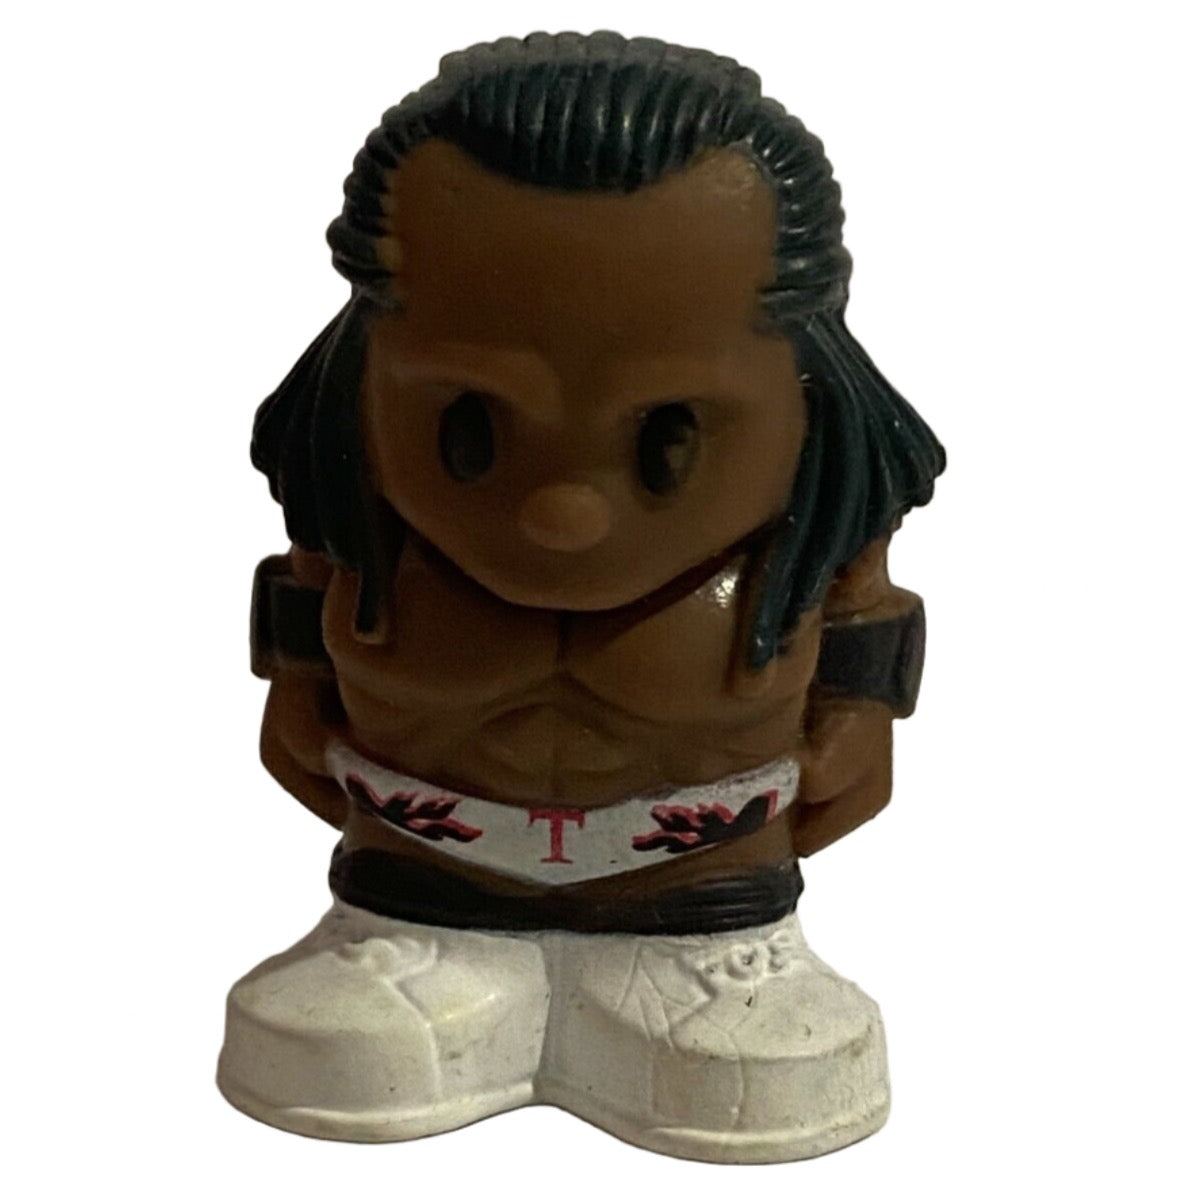 2017 WWE Headstart Ooshies Series 1 Pencil Topper Booker T [With White Trunks]